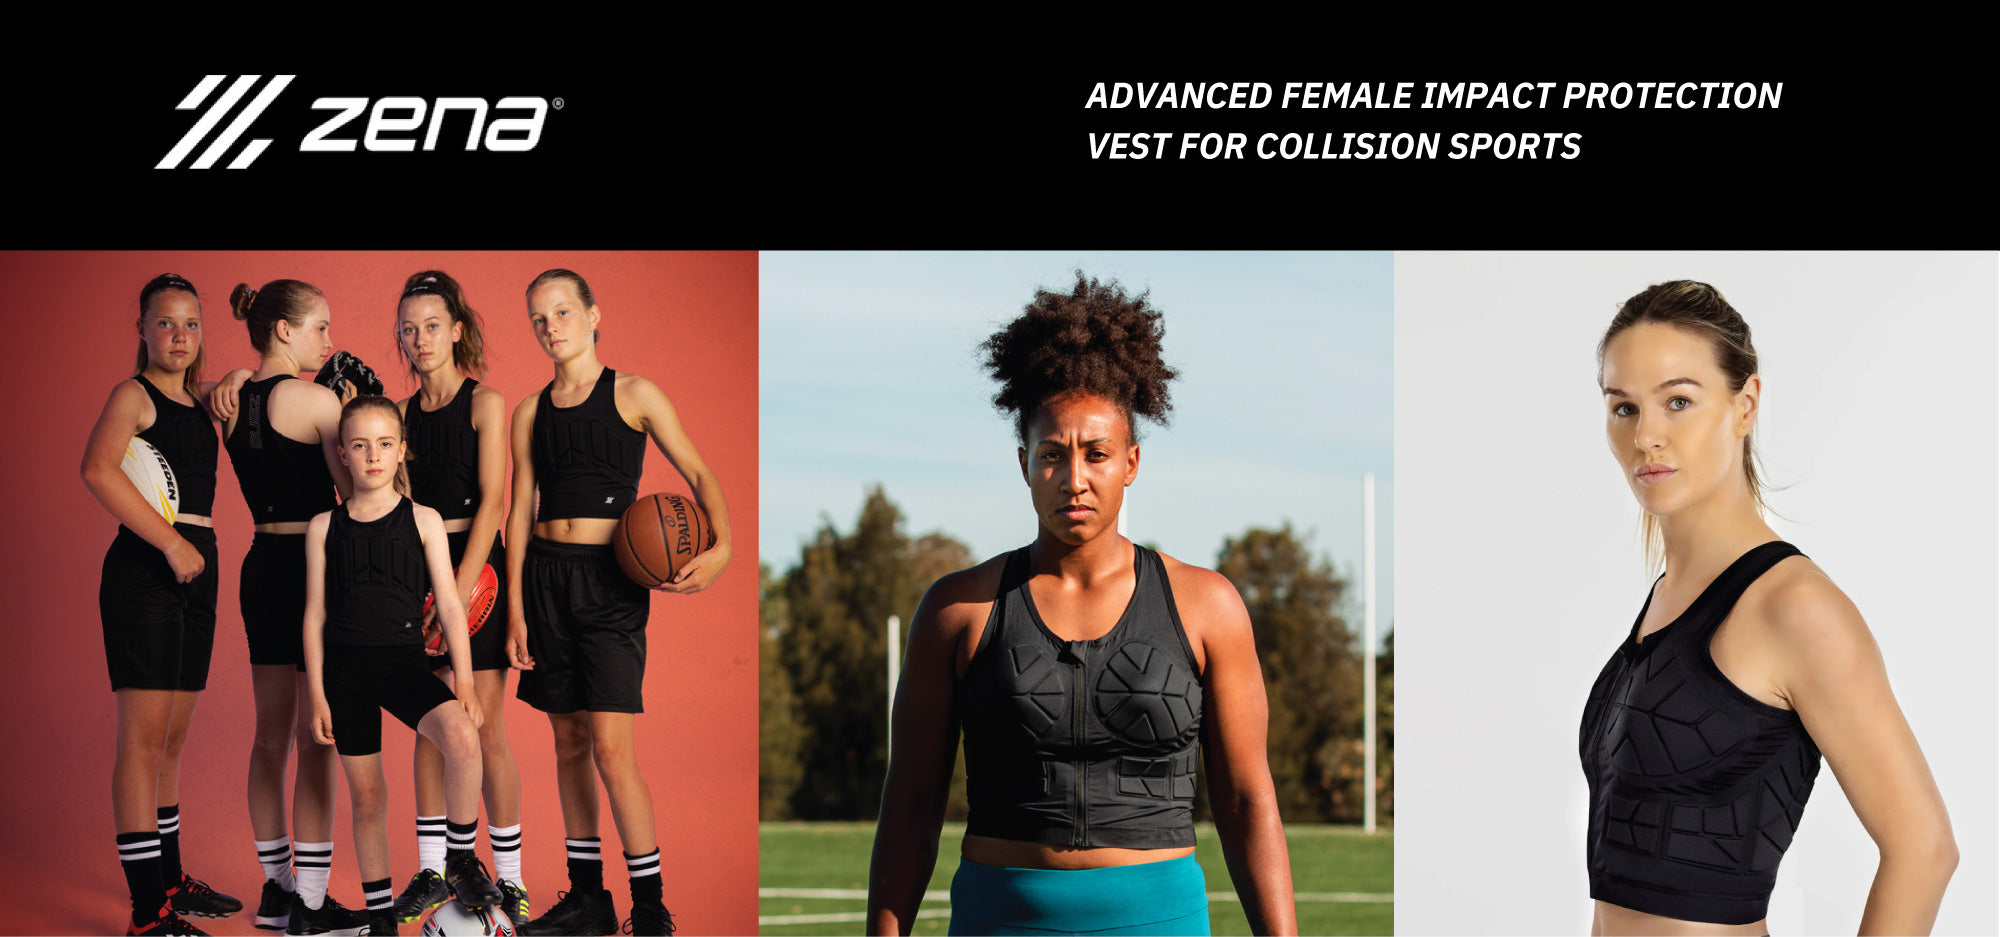 The most advanced female impact protection garment & official product of the AFLW / AFL.